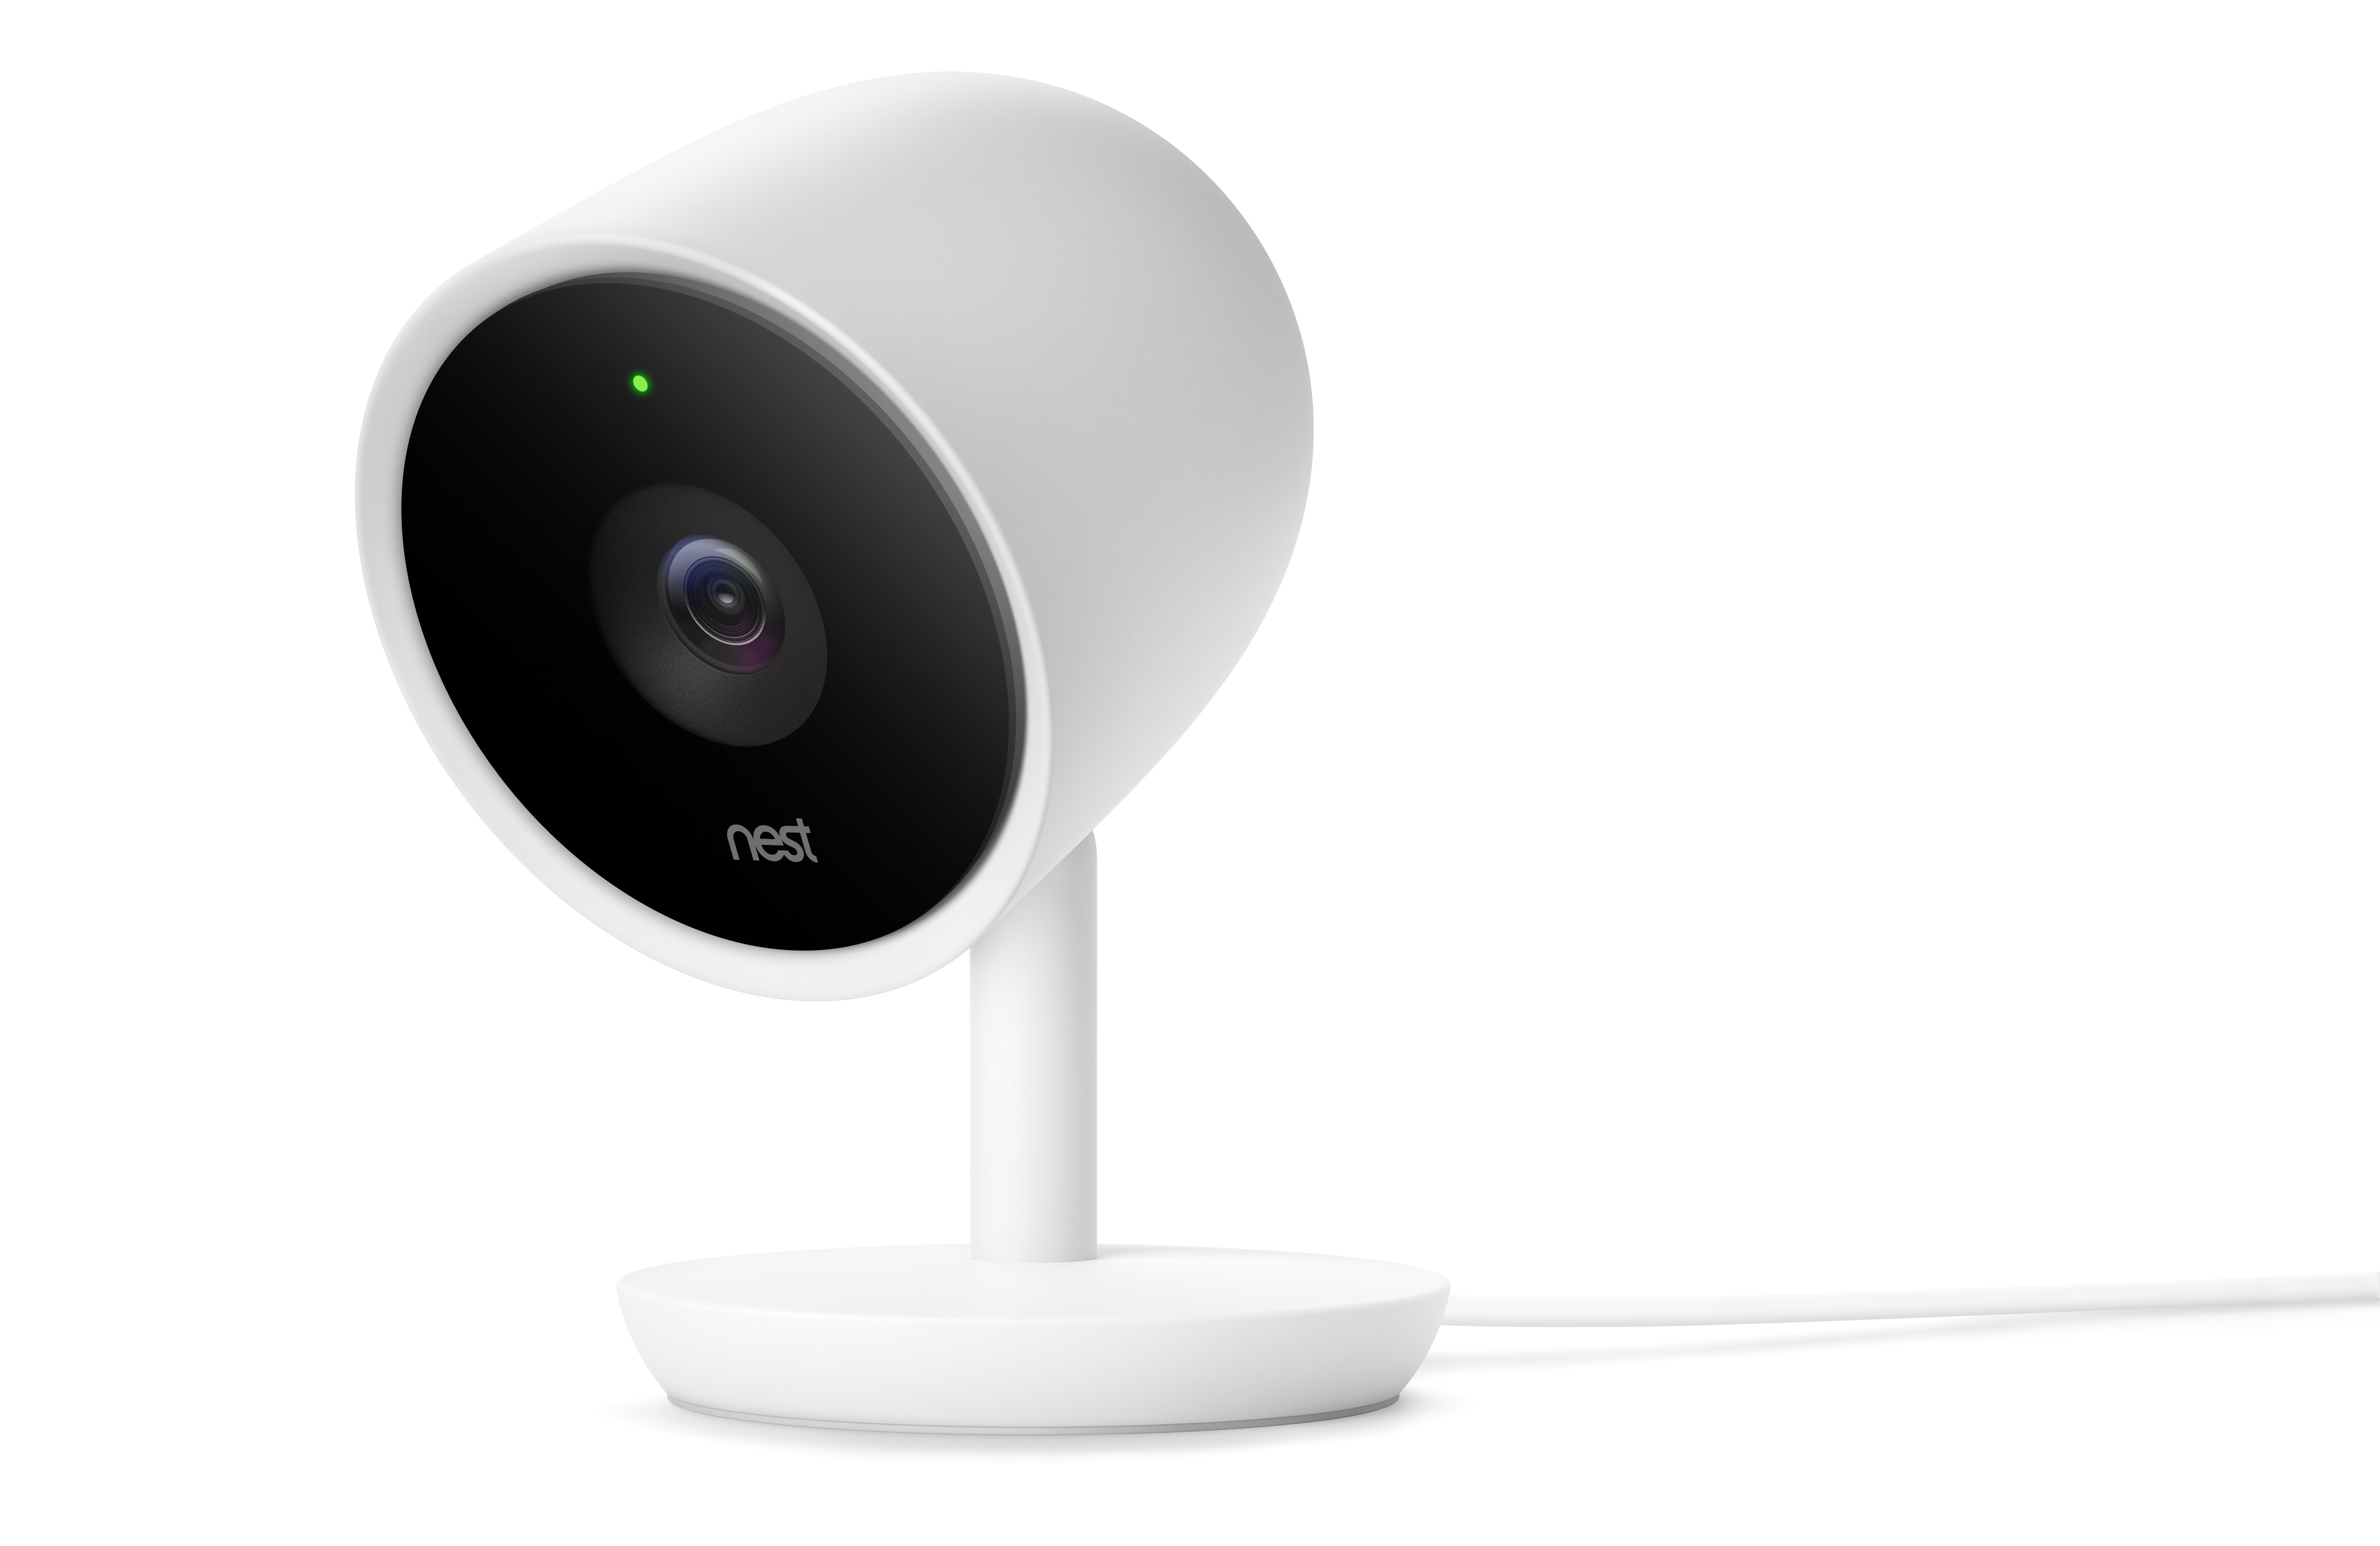 nest indoor camera looking outside